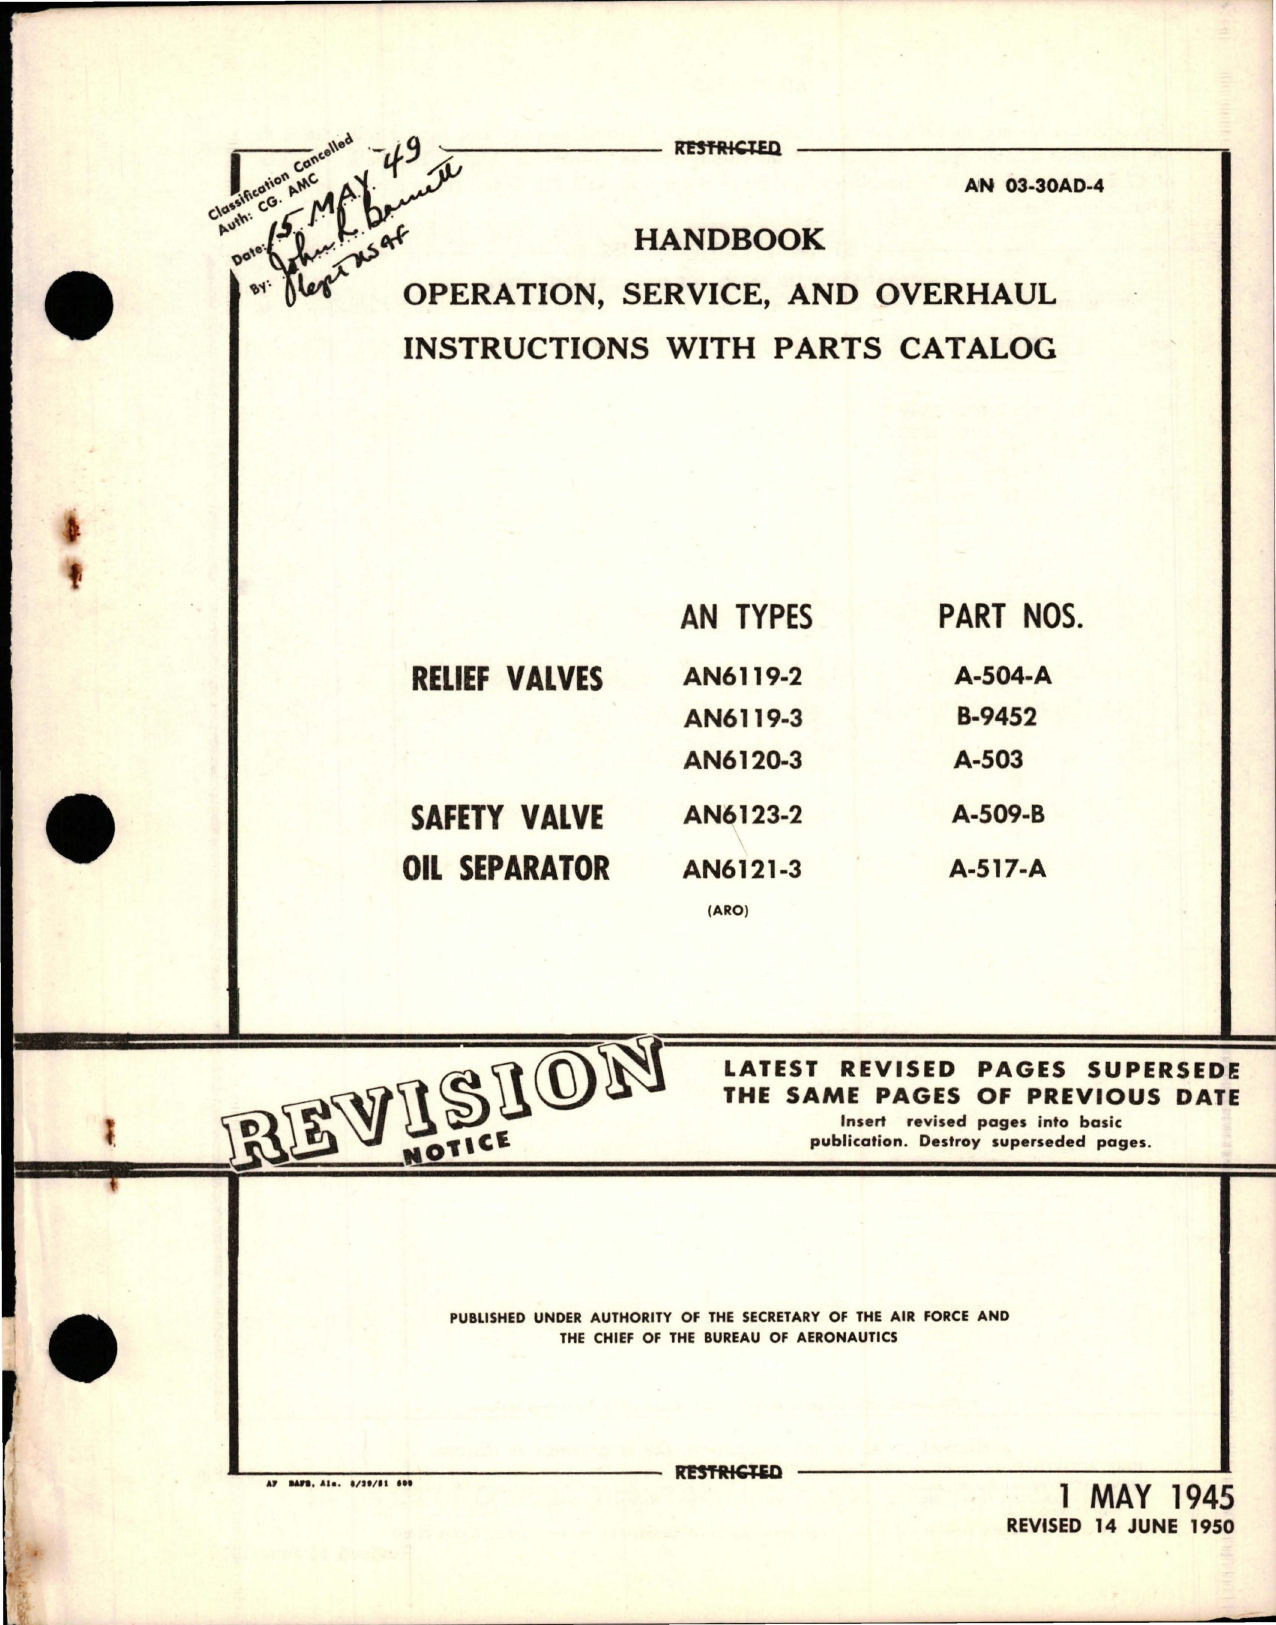 Sample page 1 from AirCorps Library document: Operation, Service and Overhaul Instructions with Parts Catalog for Relief Valves, Safety Valve Oil Separator 